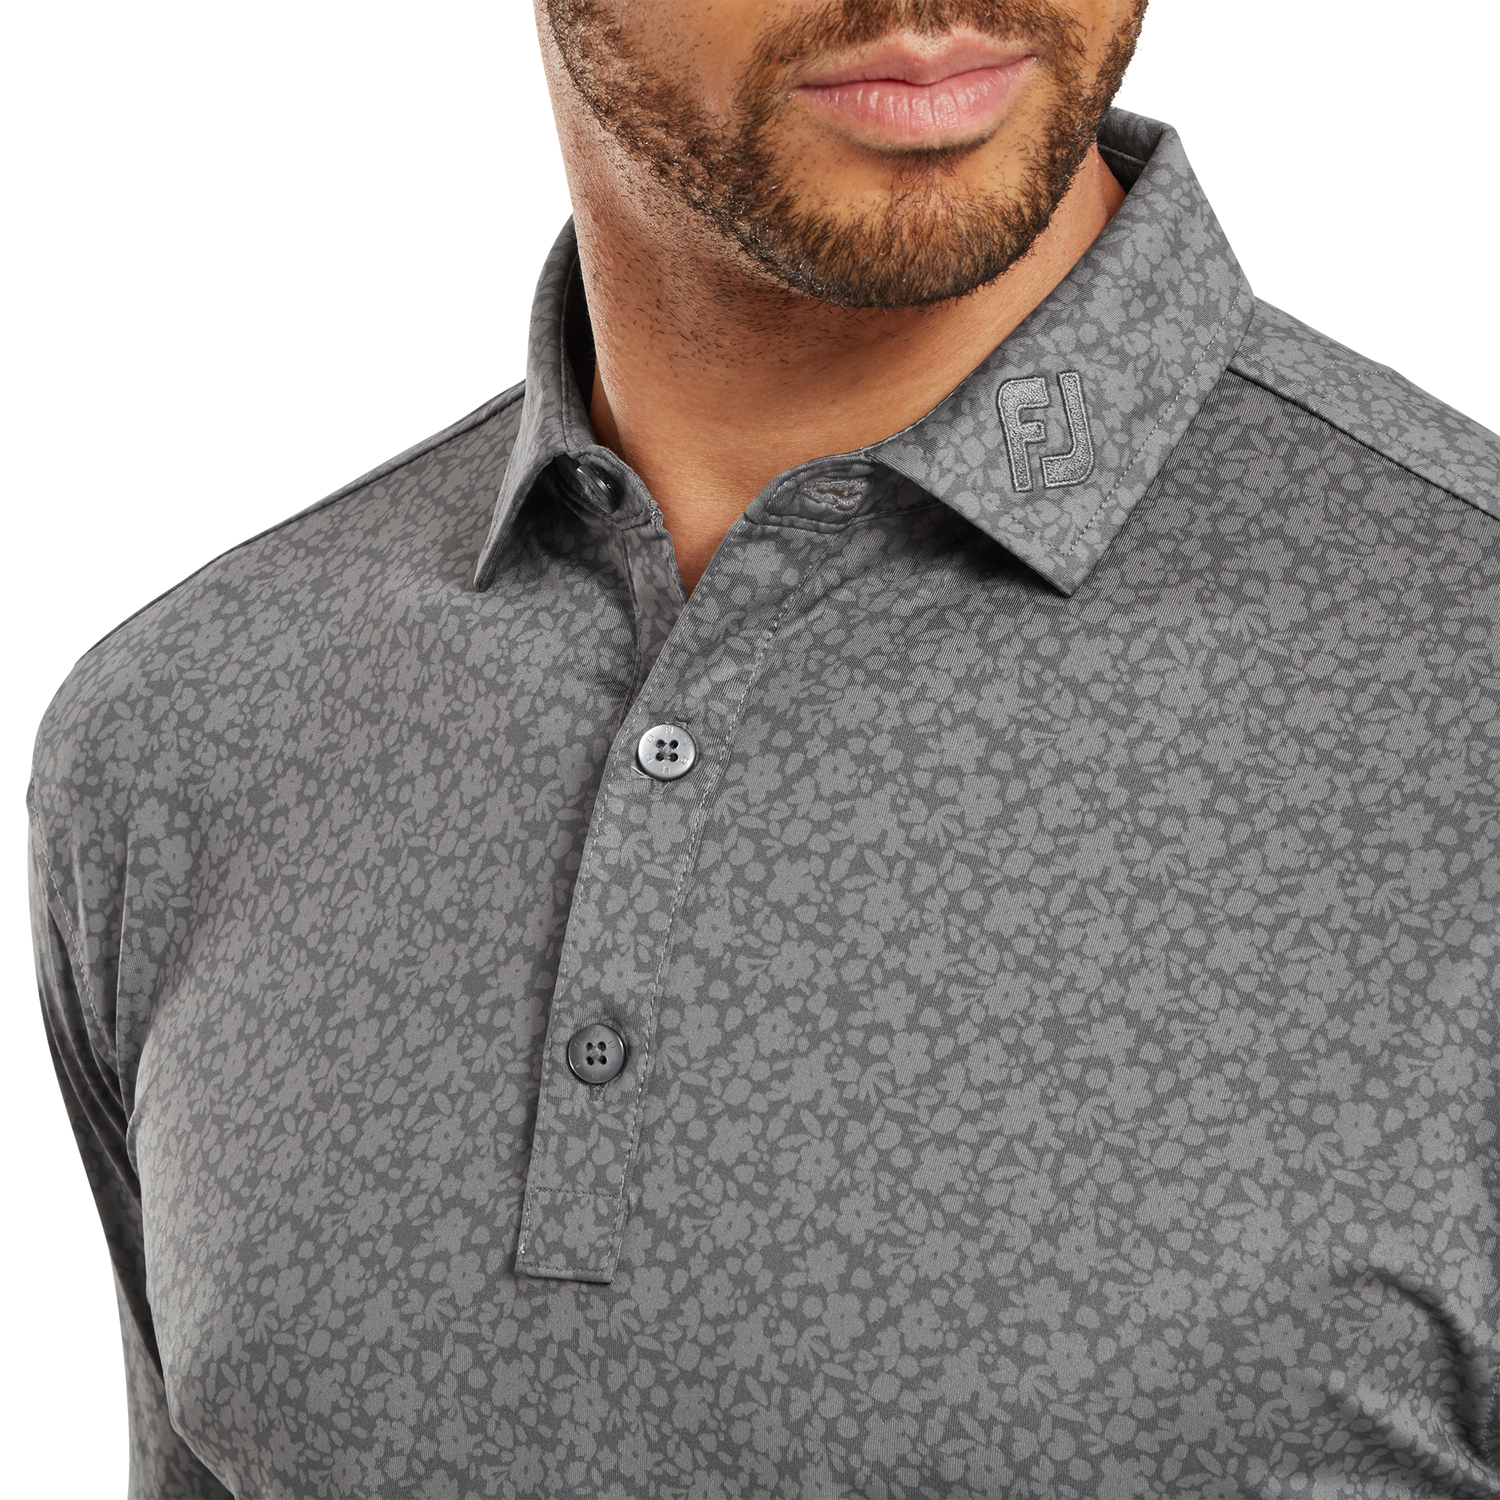 FootJoy Golf Painted Floral Polo Shirt 81622   